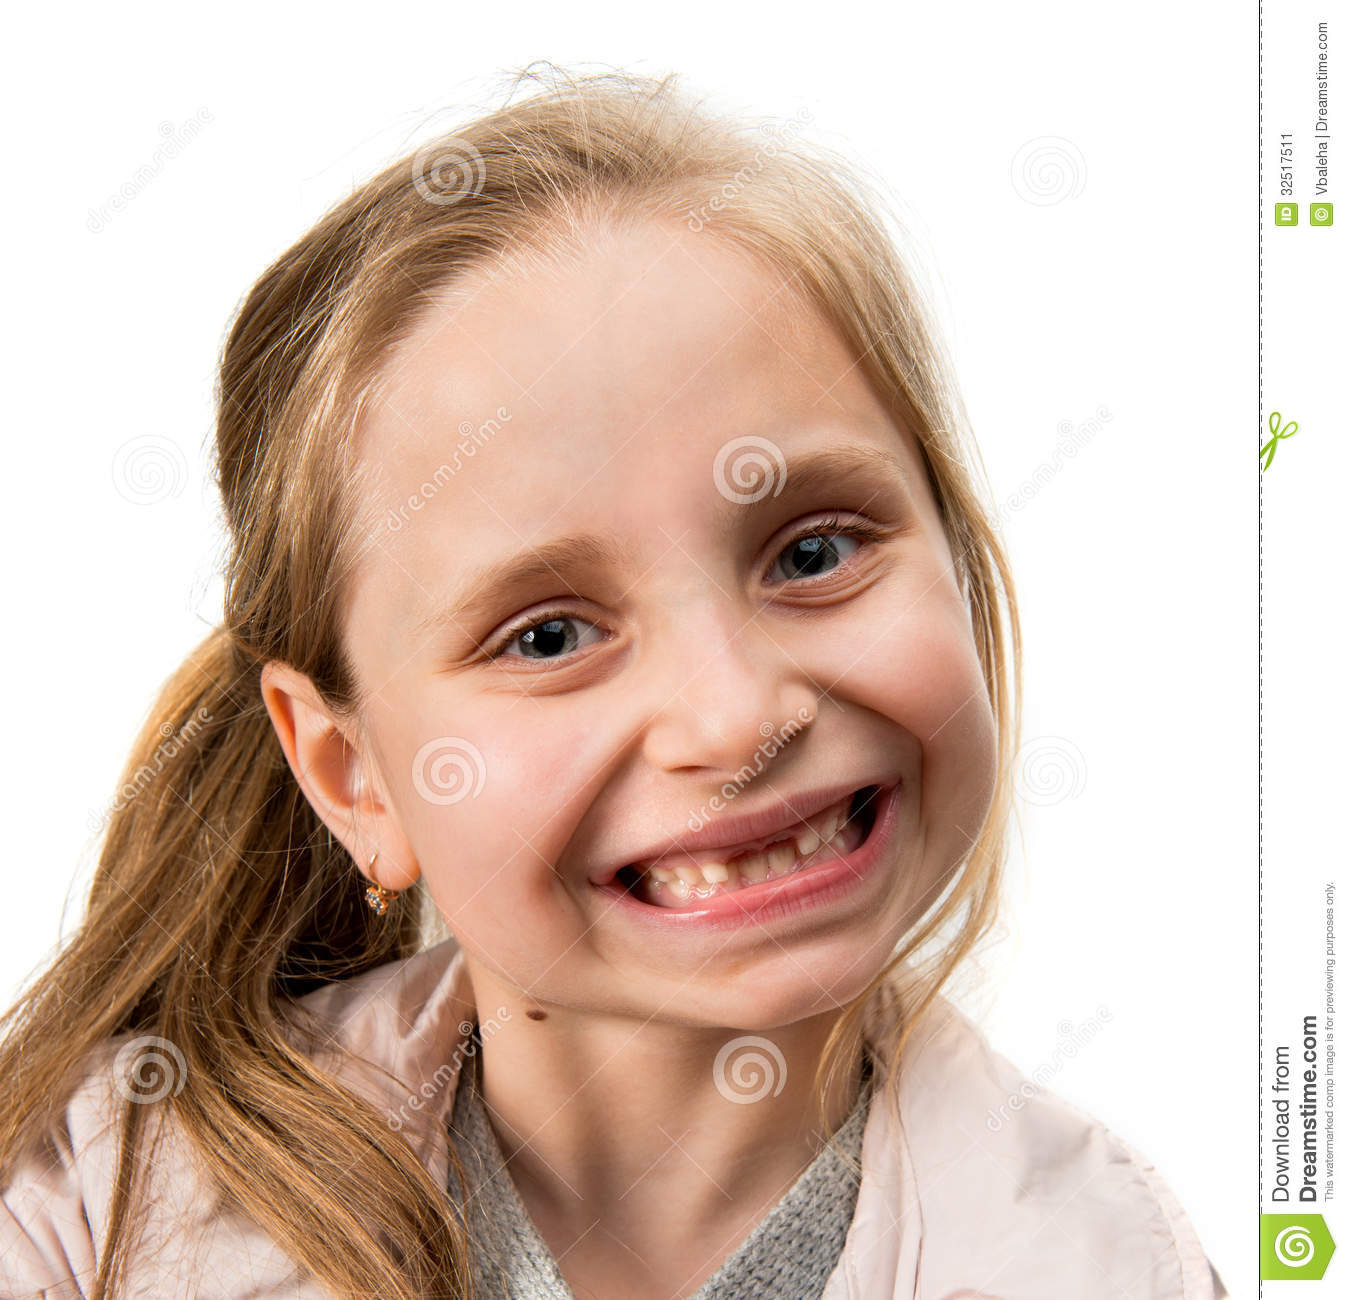 Toothless Smile Clipart Happy Toothless Girl On A